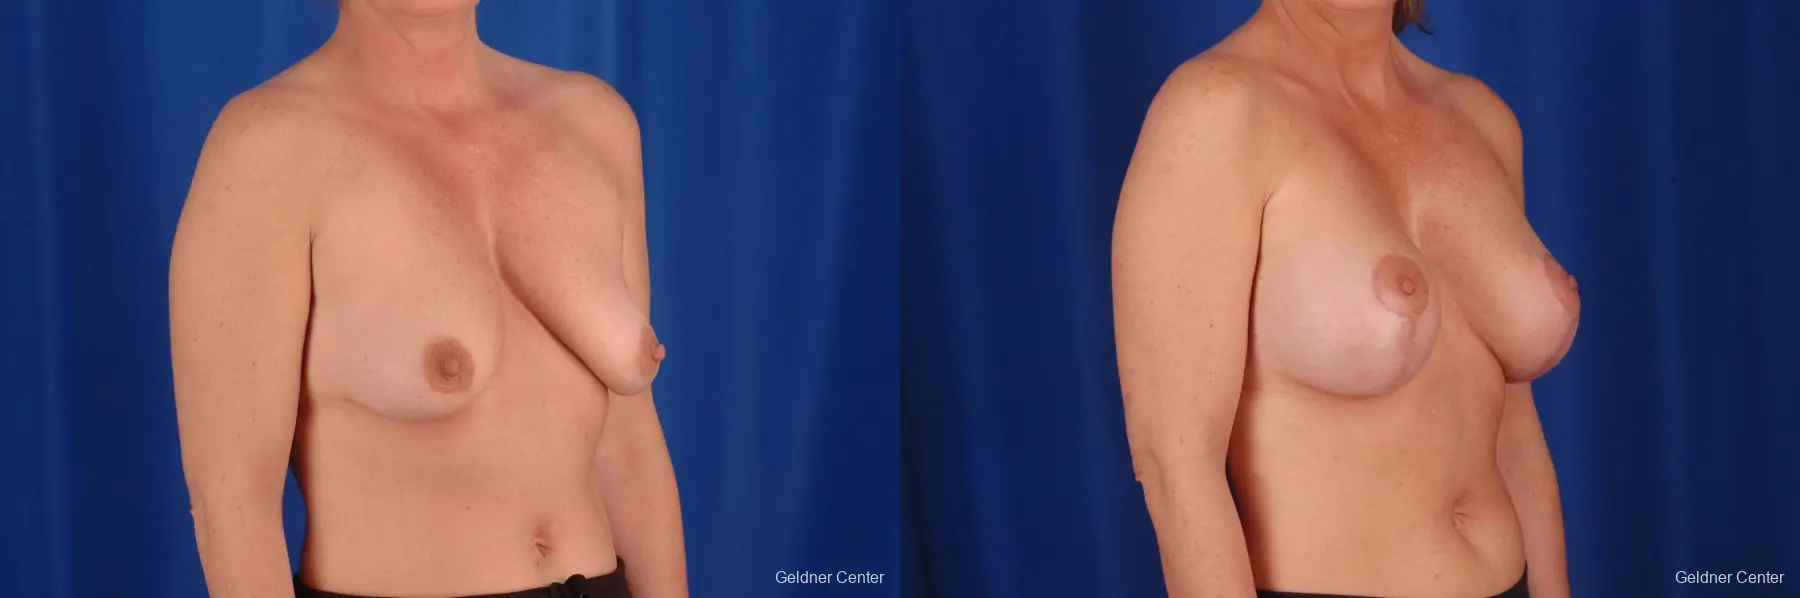 Breast Lift Lake Shore Dr, Chicago 2308 - Before and After 3